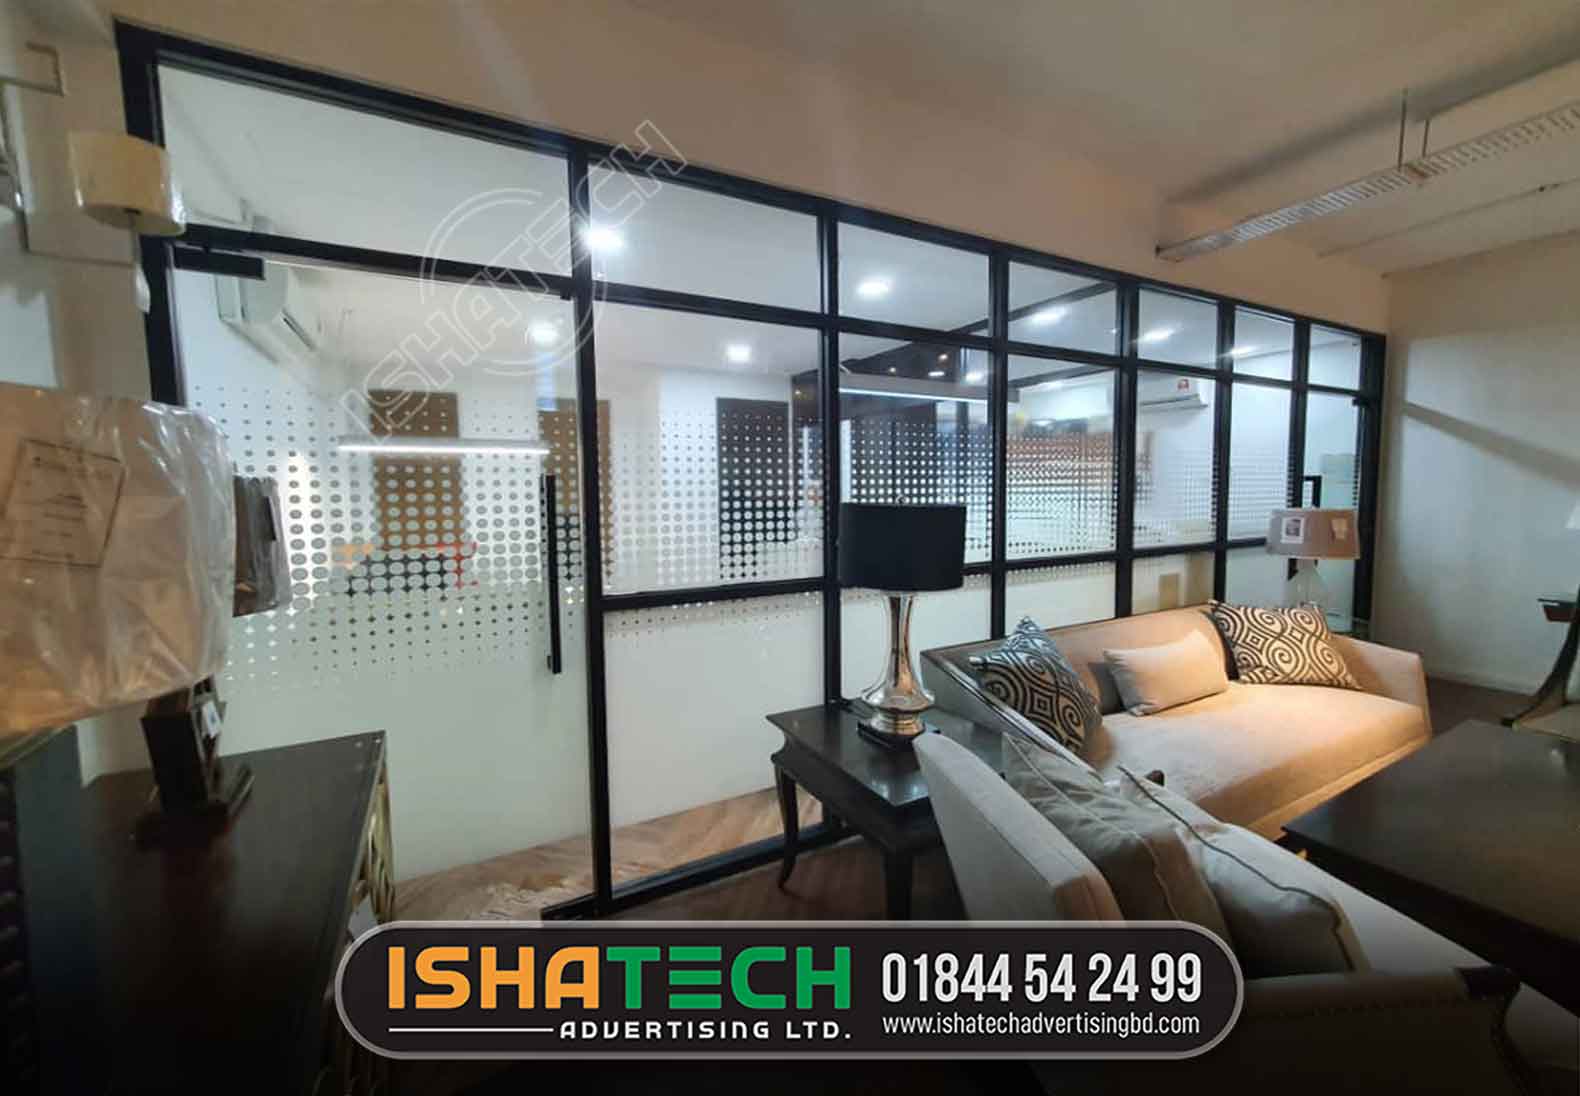 Ishatech Advertising is a renowned provider of top-tier frosted glass sticker services in Dhaka, Bangladesh. Our specialty is using our excellent frosted glass designs to add privacy and luxury to your rooms. Our talented craftspeople expertly install frosted glass stickers to windows and doors to create eye-catching designs that perfectly balance style and utility. We provide a range of options, so you may choose from a delicate frosted glass sheet or a frosted glass texture design. With Ishatech Advertising's unmatched skill in frosted glass stickers—every detail is expertly crafted—you may enhance the ambience of your surroundings.